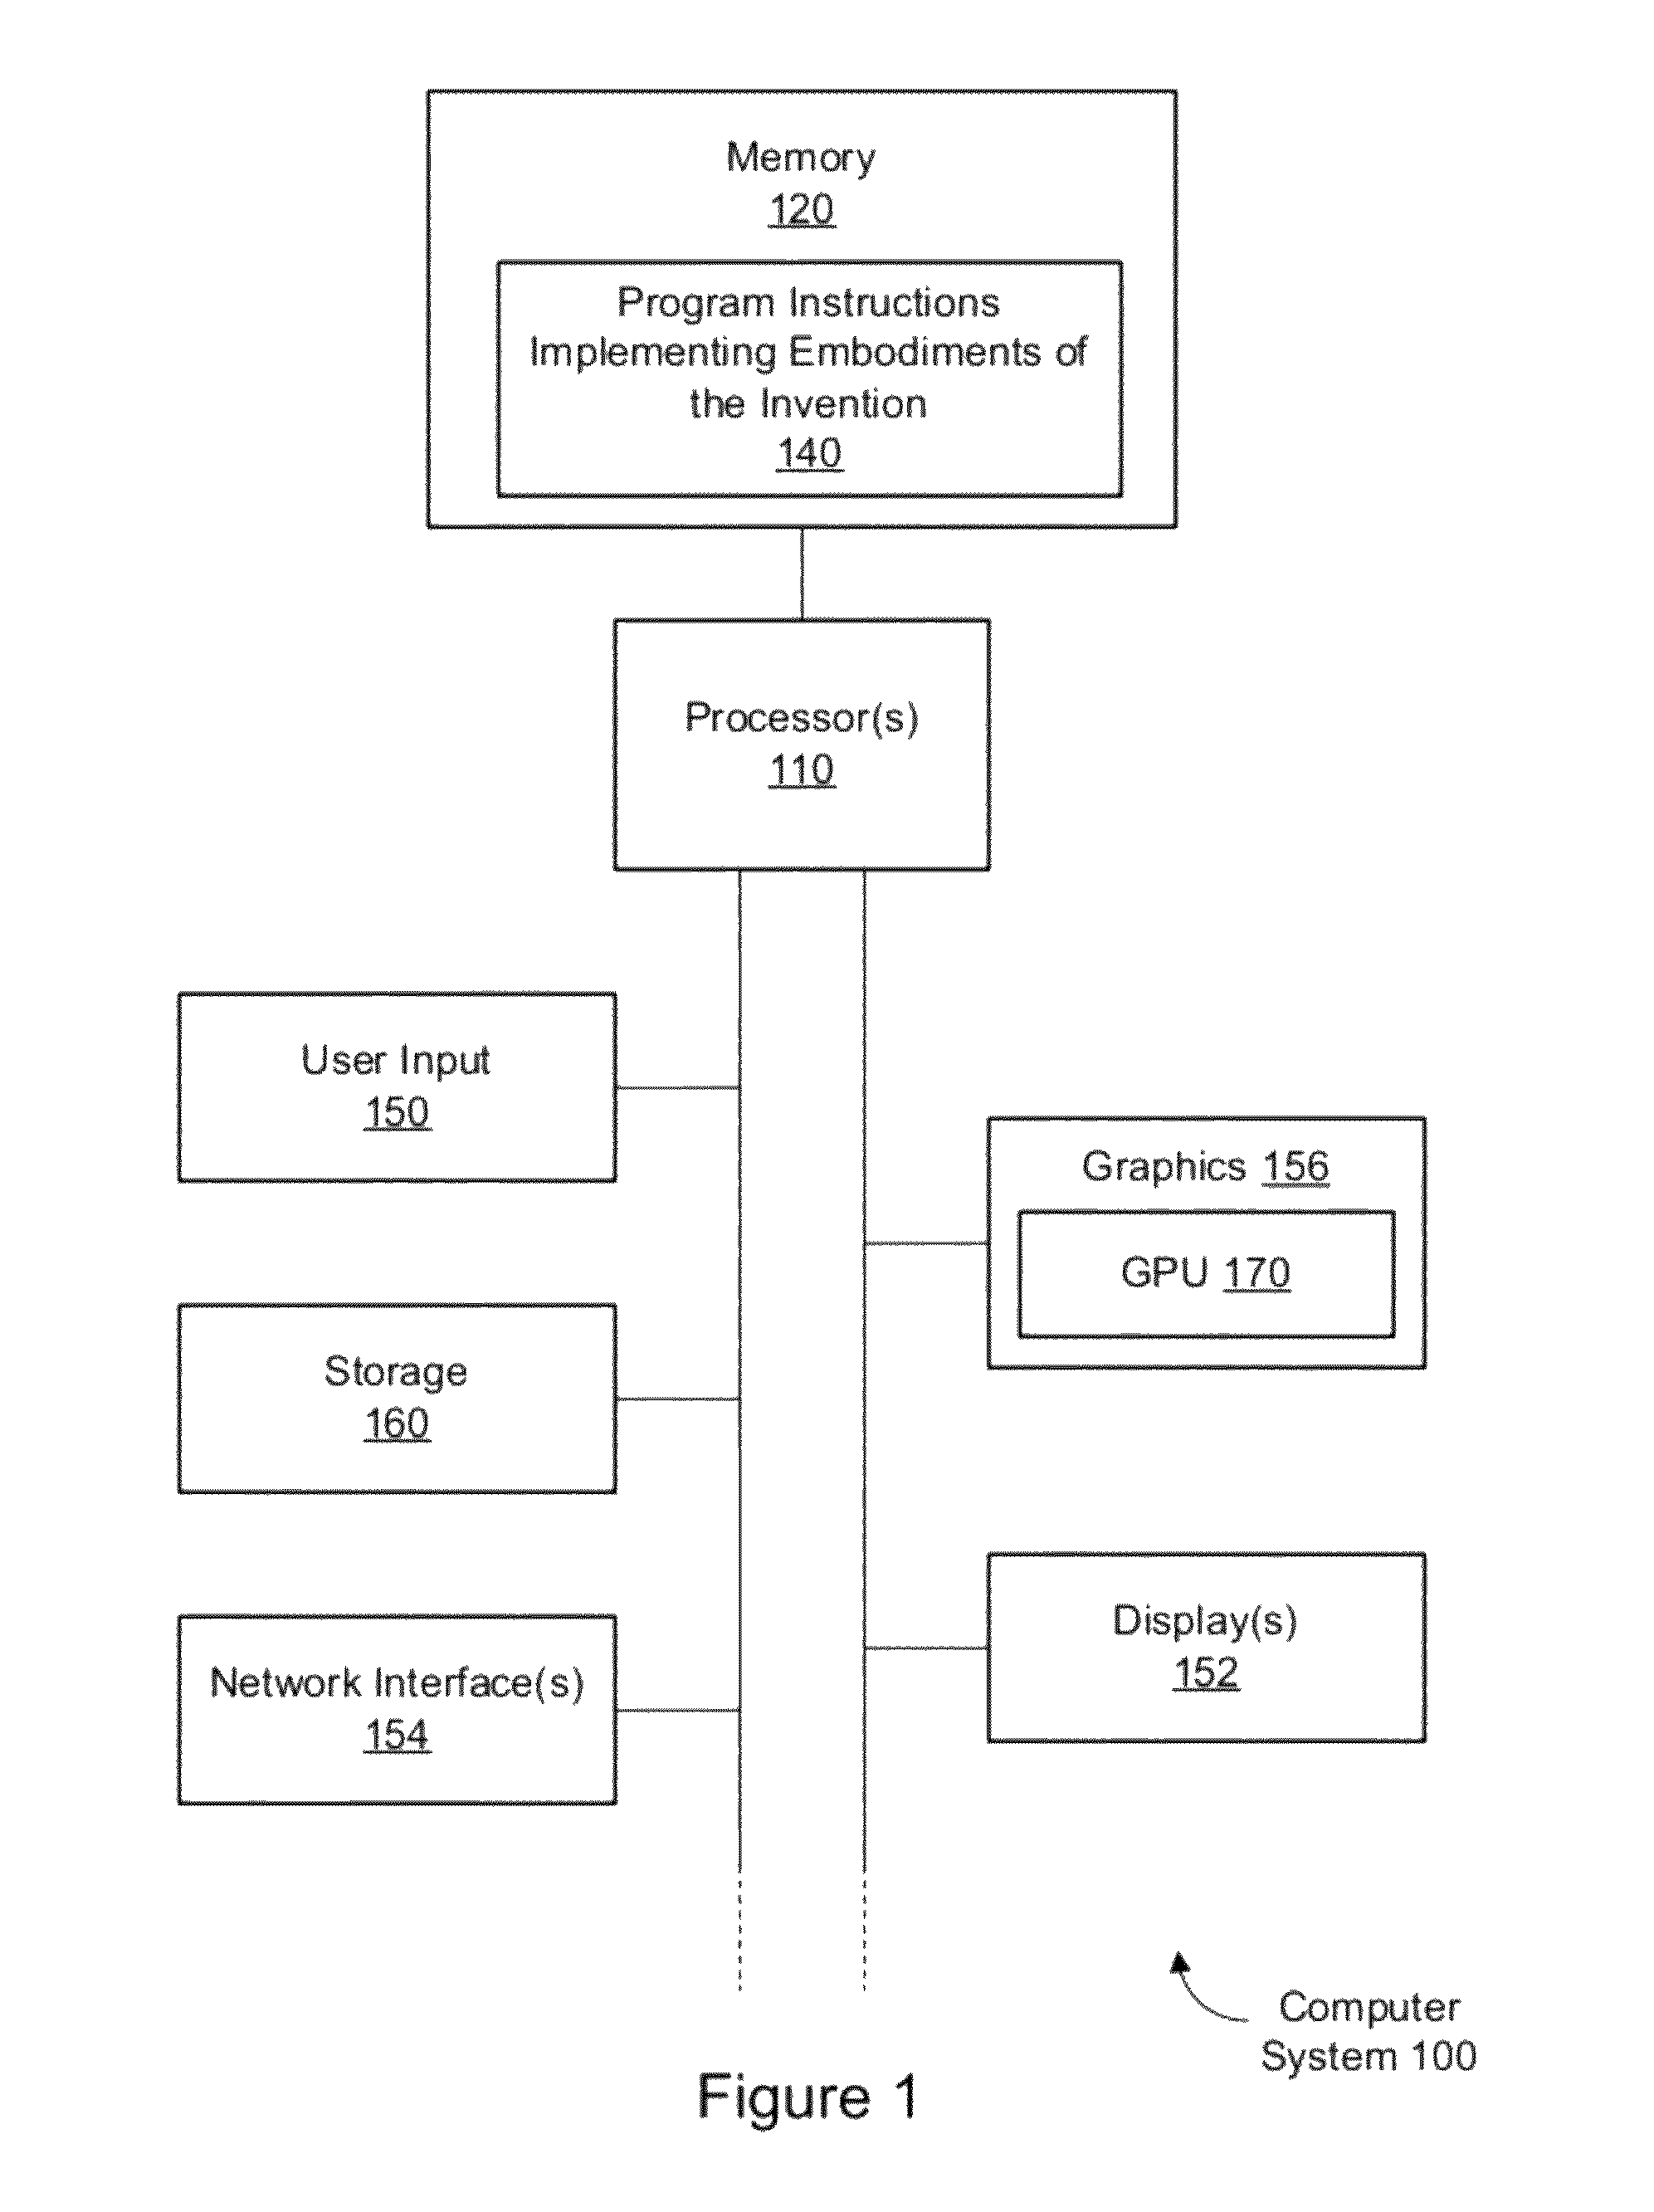 Method and apparatus for applying Gaussian Mixture Models to local image patches using an adaptive color lookup table